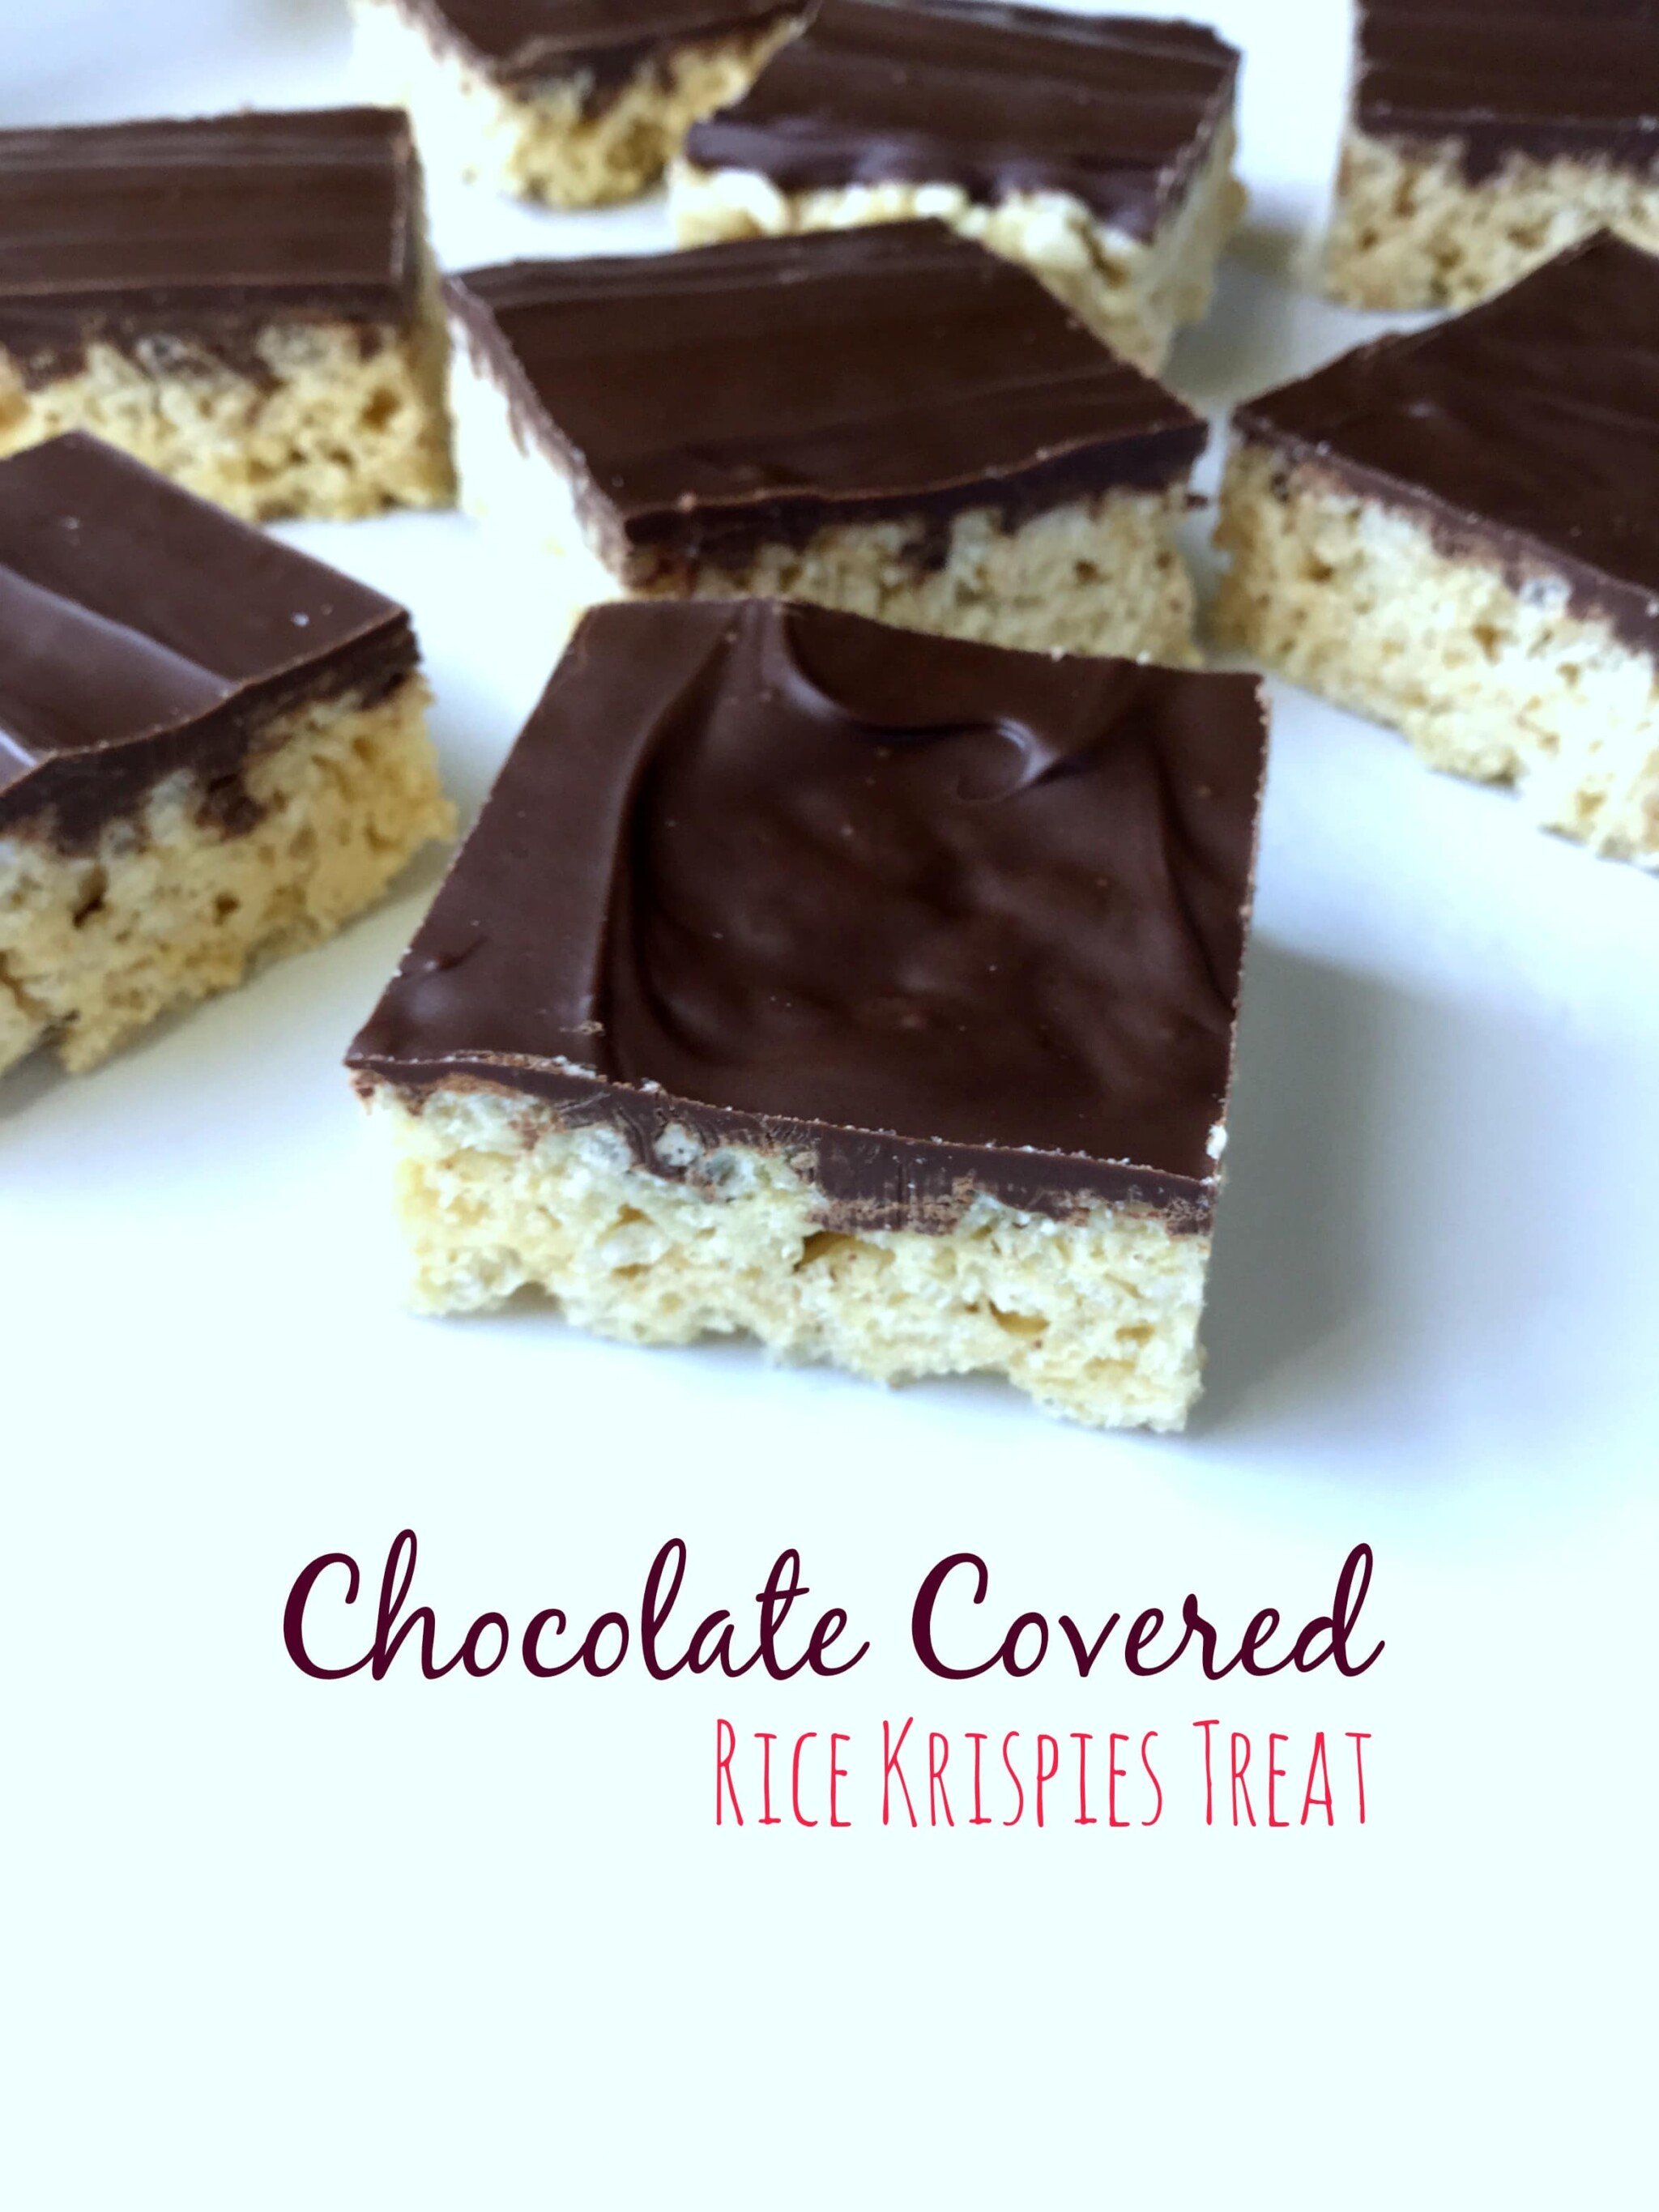 Chocolate Covered Rice Krispies Treat | Garden in the Kitchen